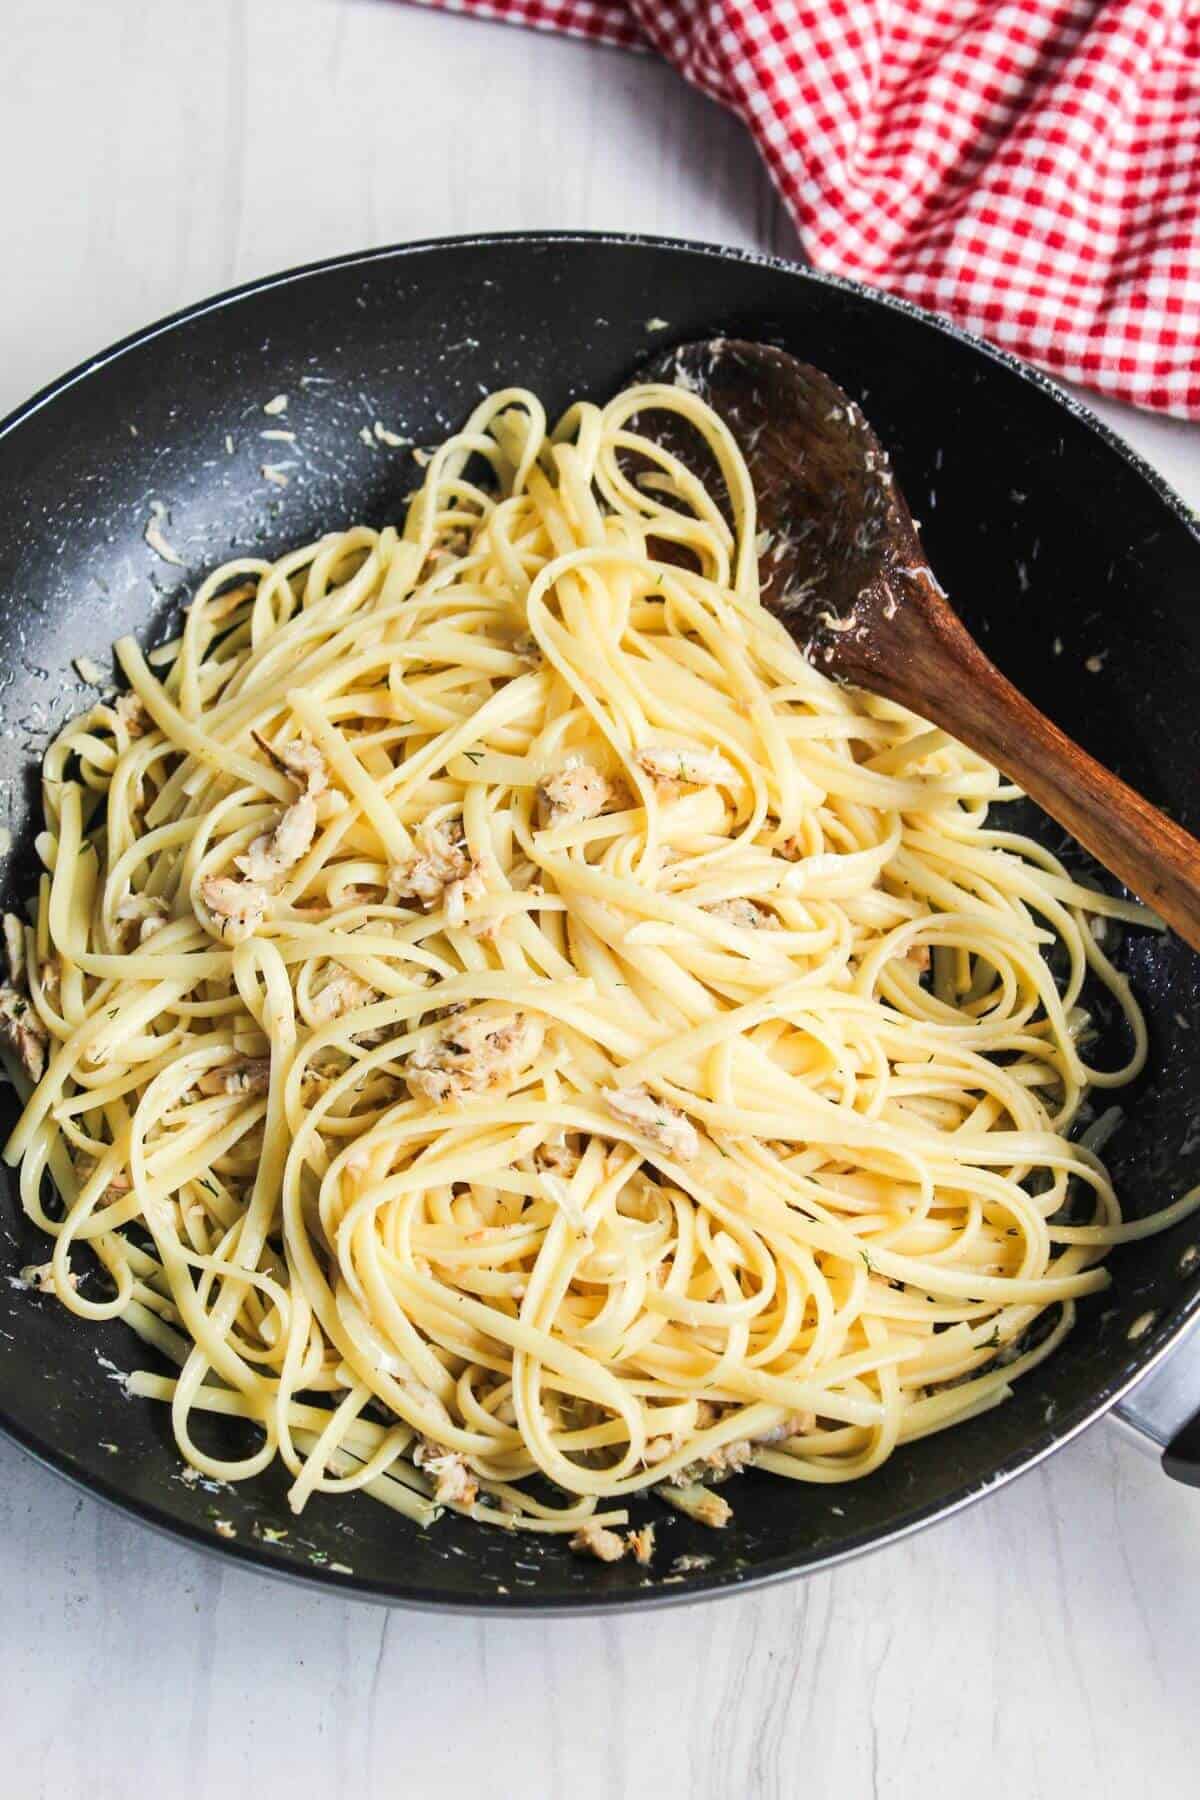 A black skillet containing spaghetti tossed with crab, garlic, and herbs, with a wooden spoon, on a white surface beside a red and white checkered napkin.